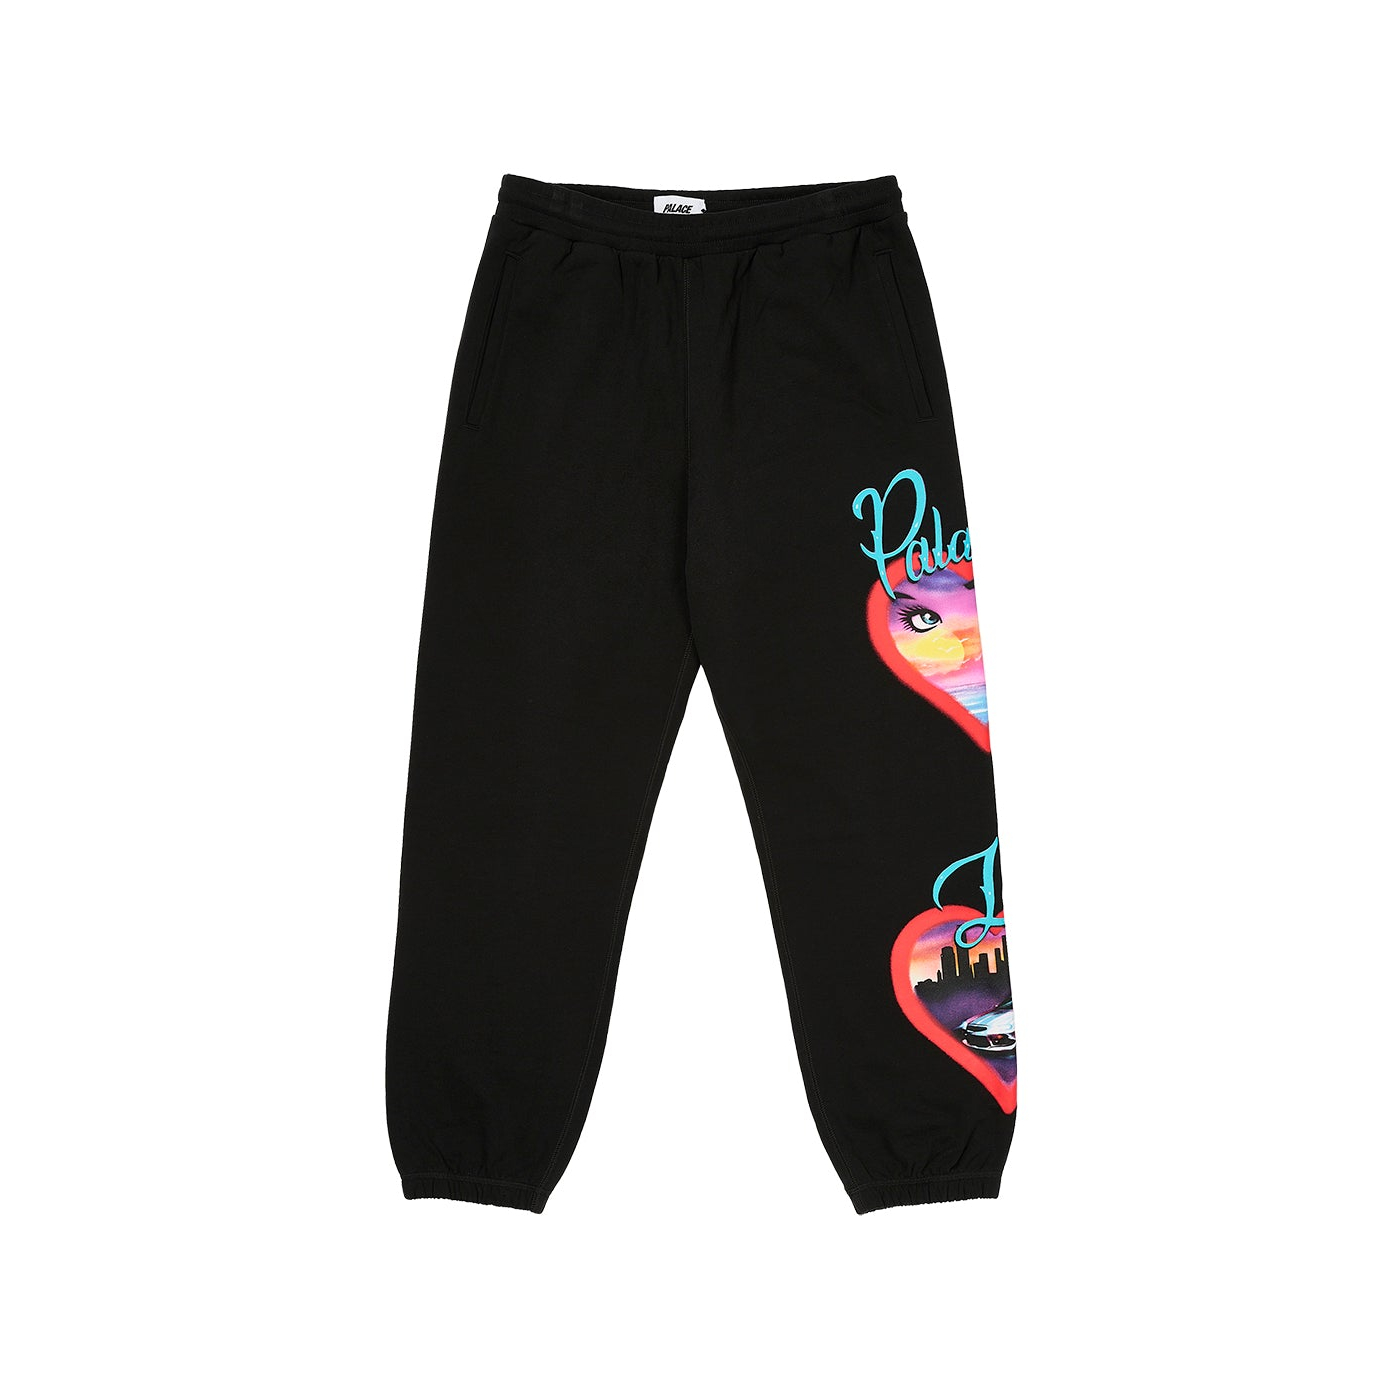 Thumbnail PALACE FOREVER JOGGER BLACK one color